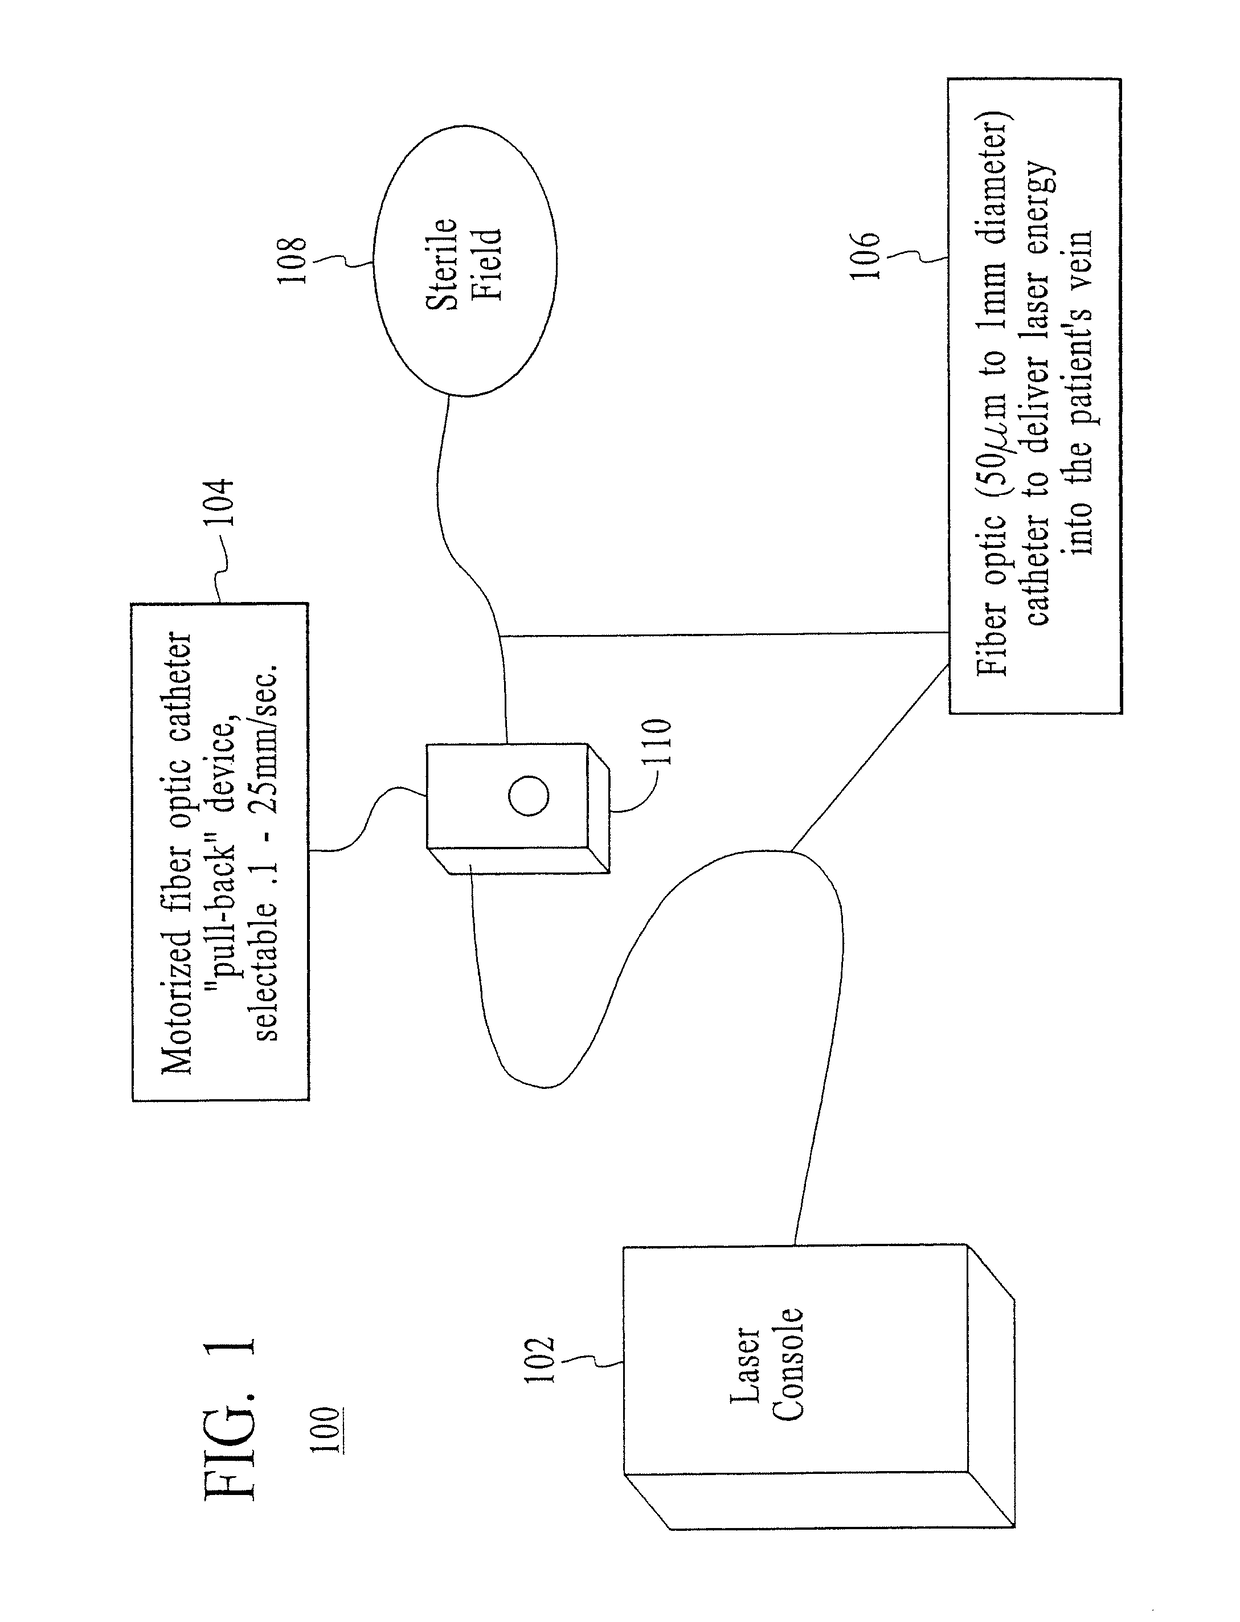 System and method for endovenous treatment of varicose veins with mid infrared laser